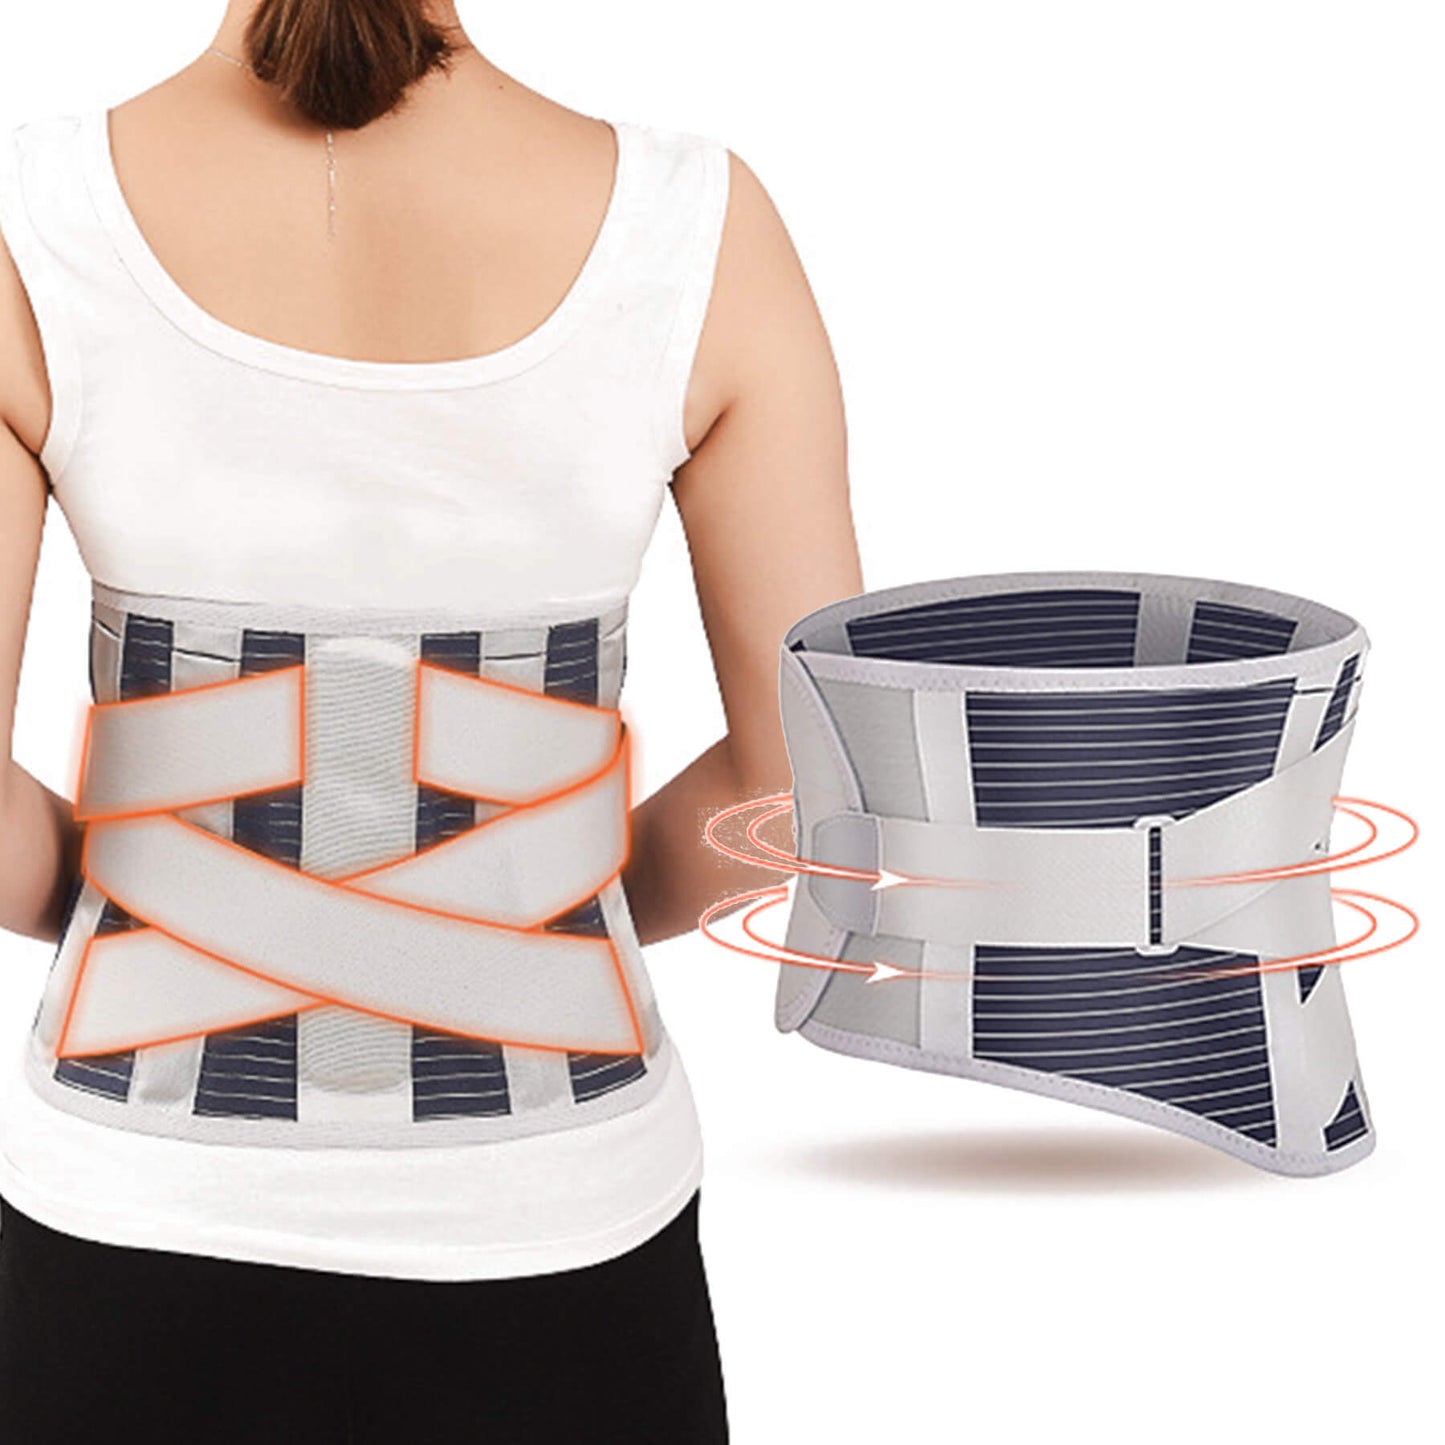 Back Brace with 6 Support Stays, Tourmaline Self-heating and Magnetic Pad for Lower Back Pain Relief